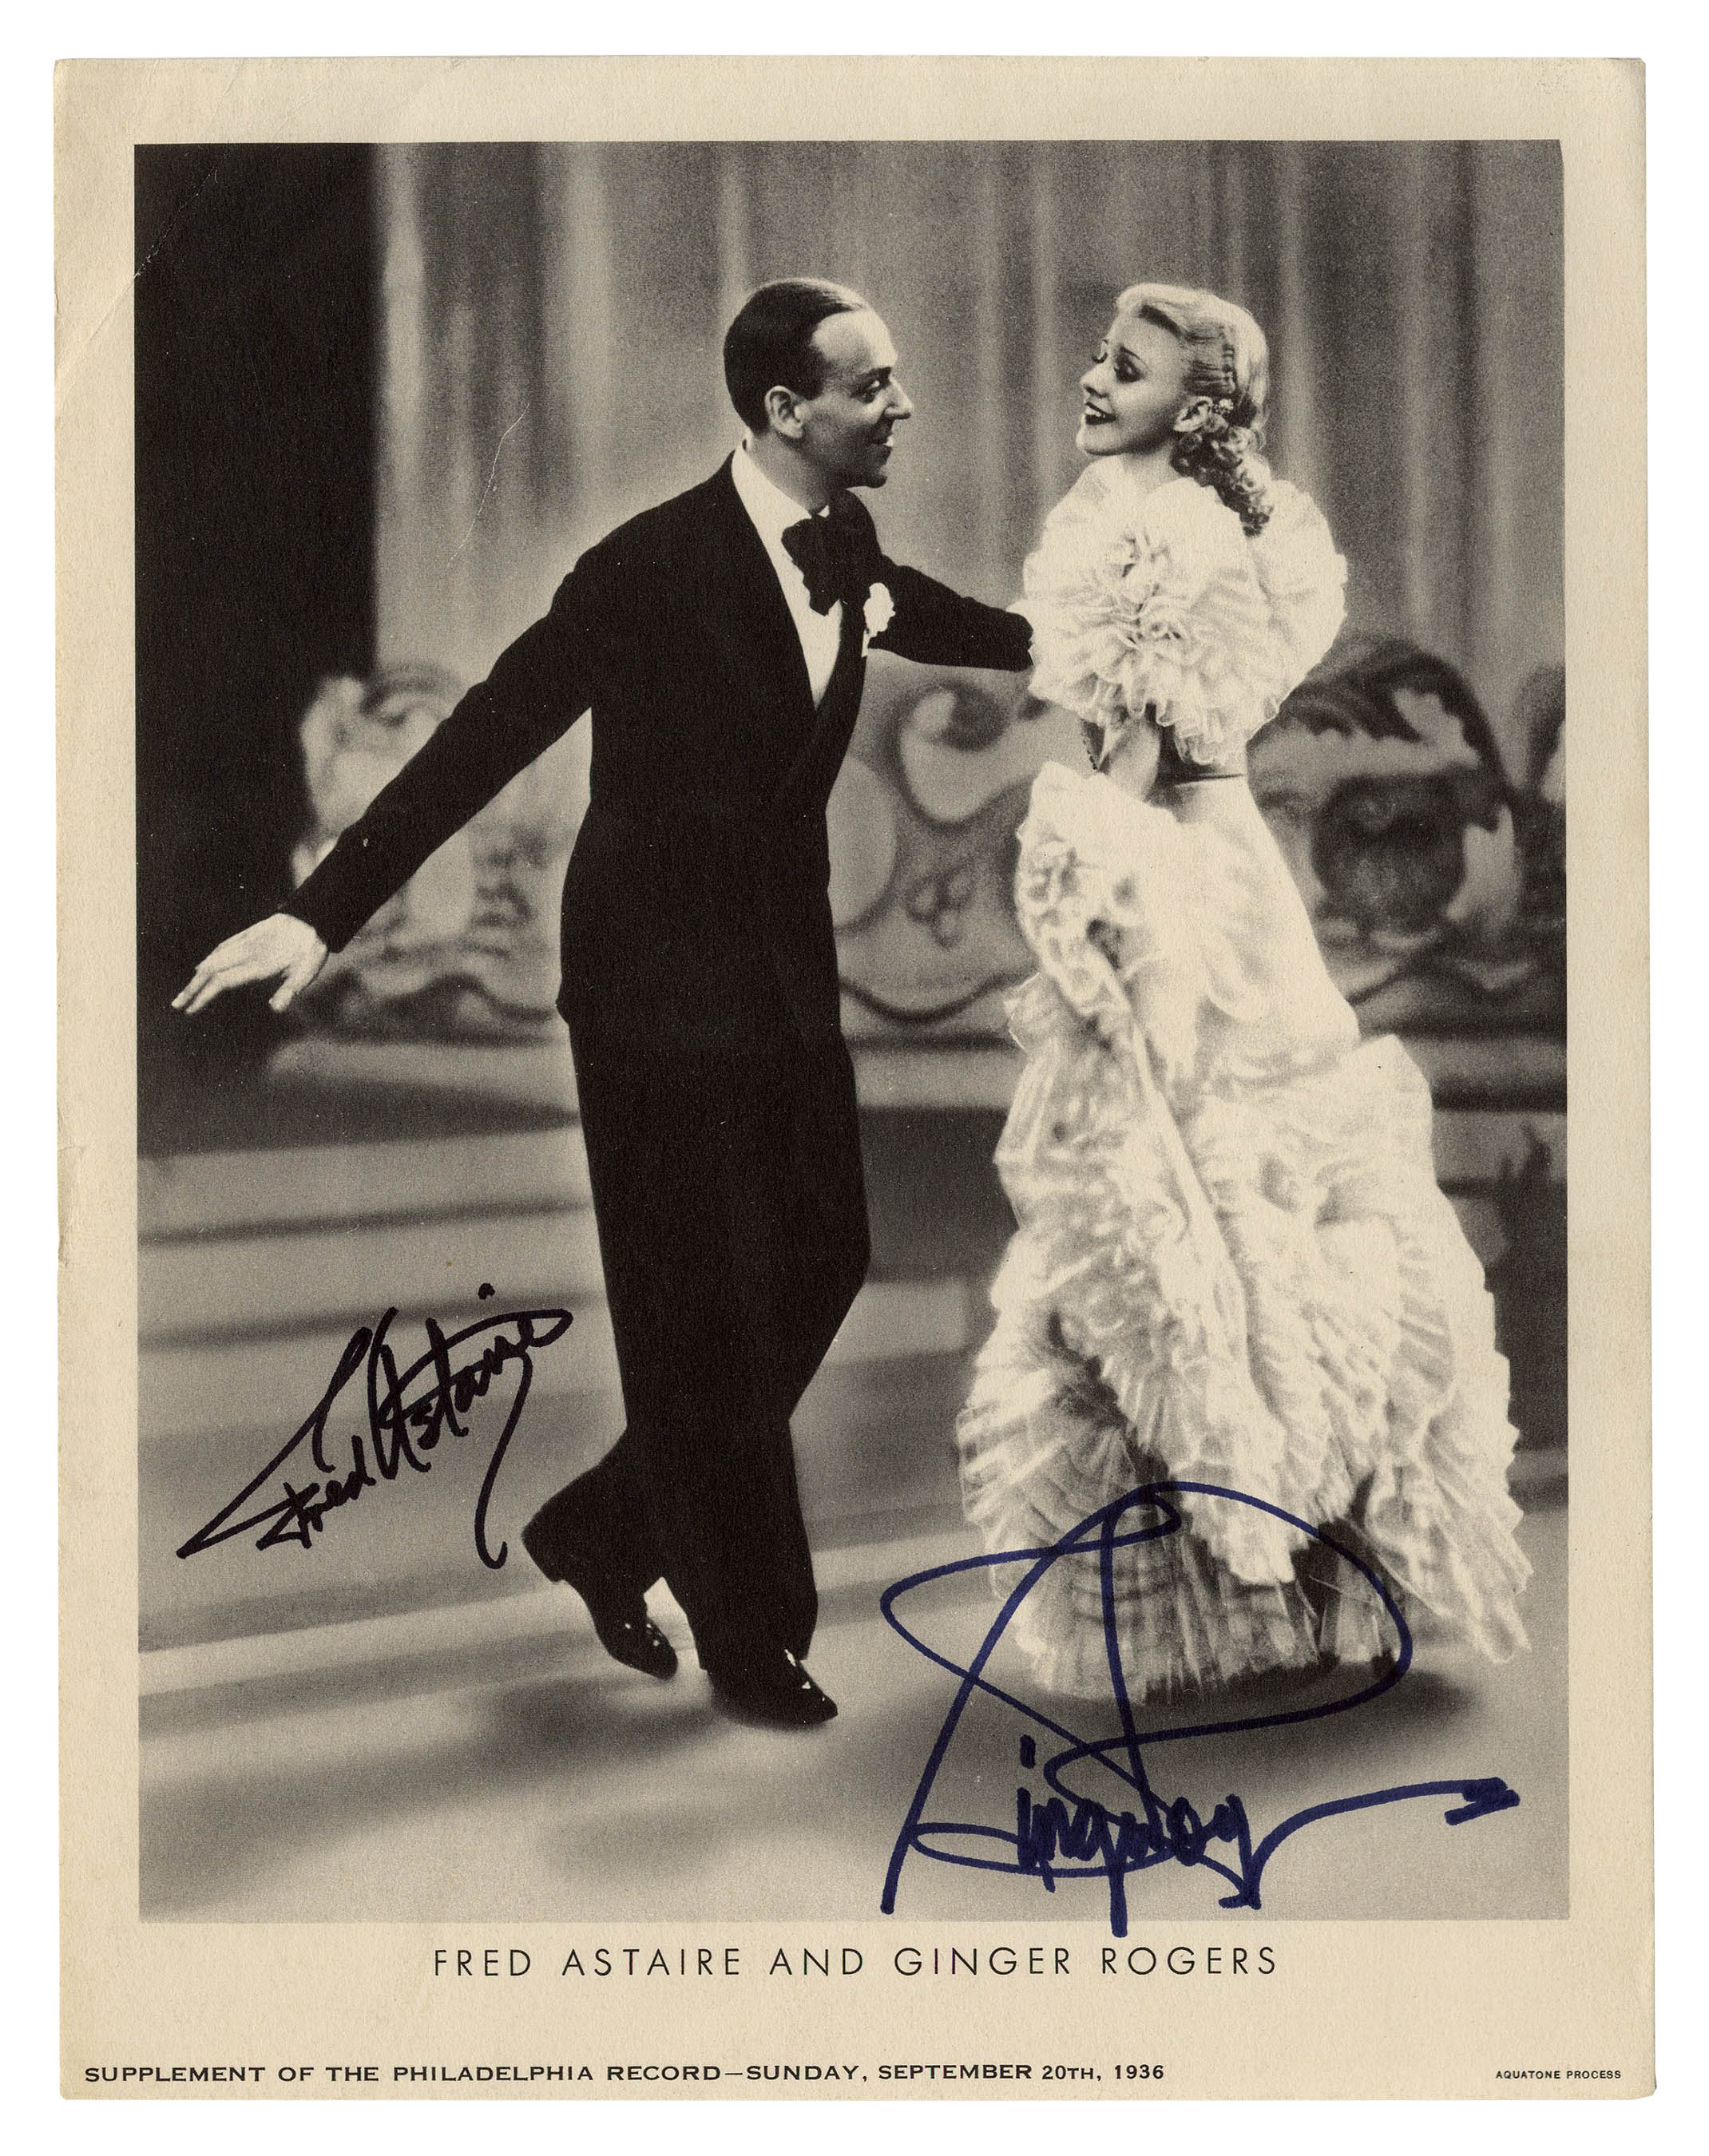 FRED ASTAIRE AND GINGER ROGERS SIGNED PHOTO PRINT AUTOGRAPH 